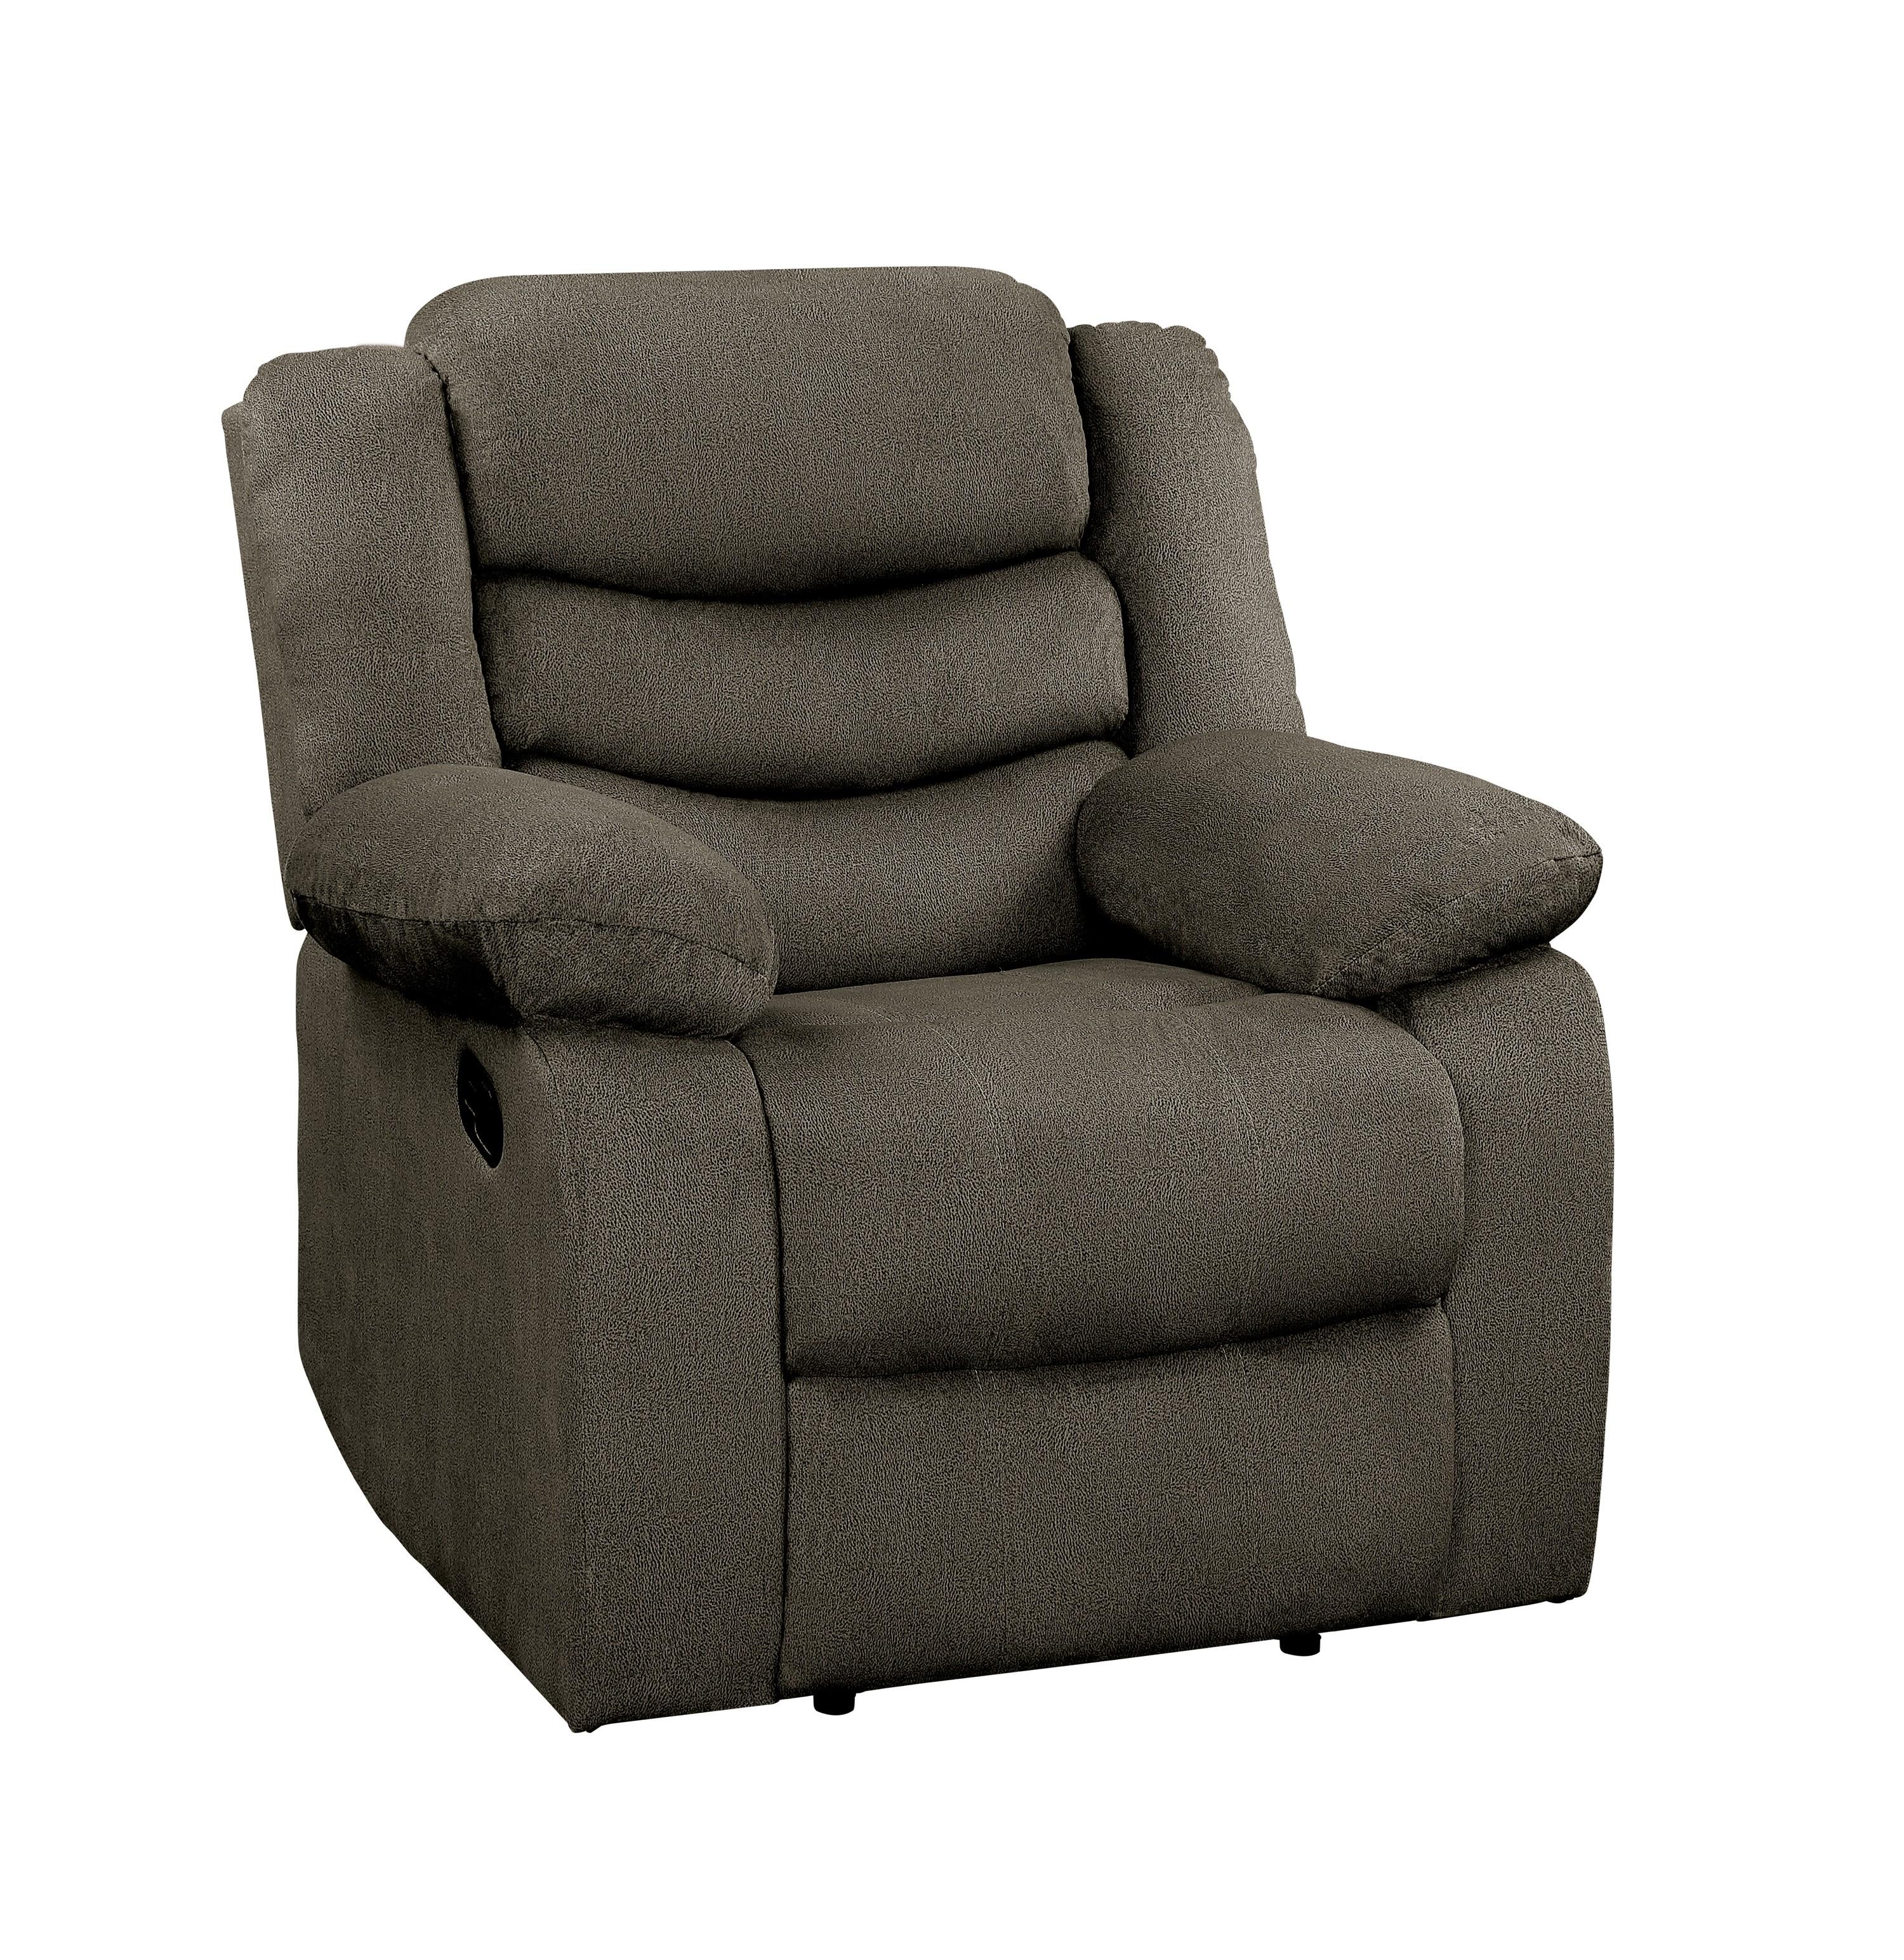 

    
Transitional Brown Microfiber Reclining Chair Homelegance 9526BR-1 Discus
